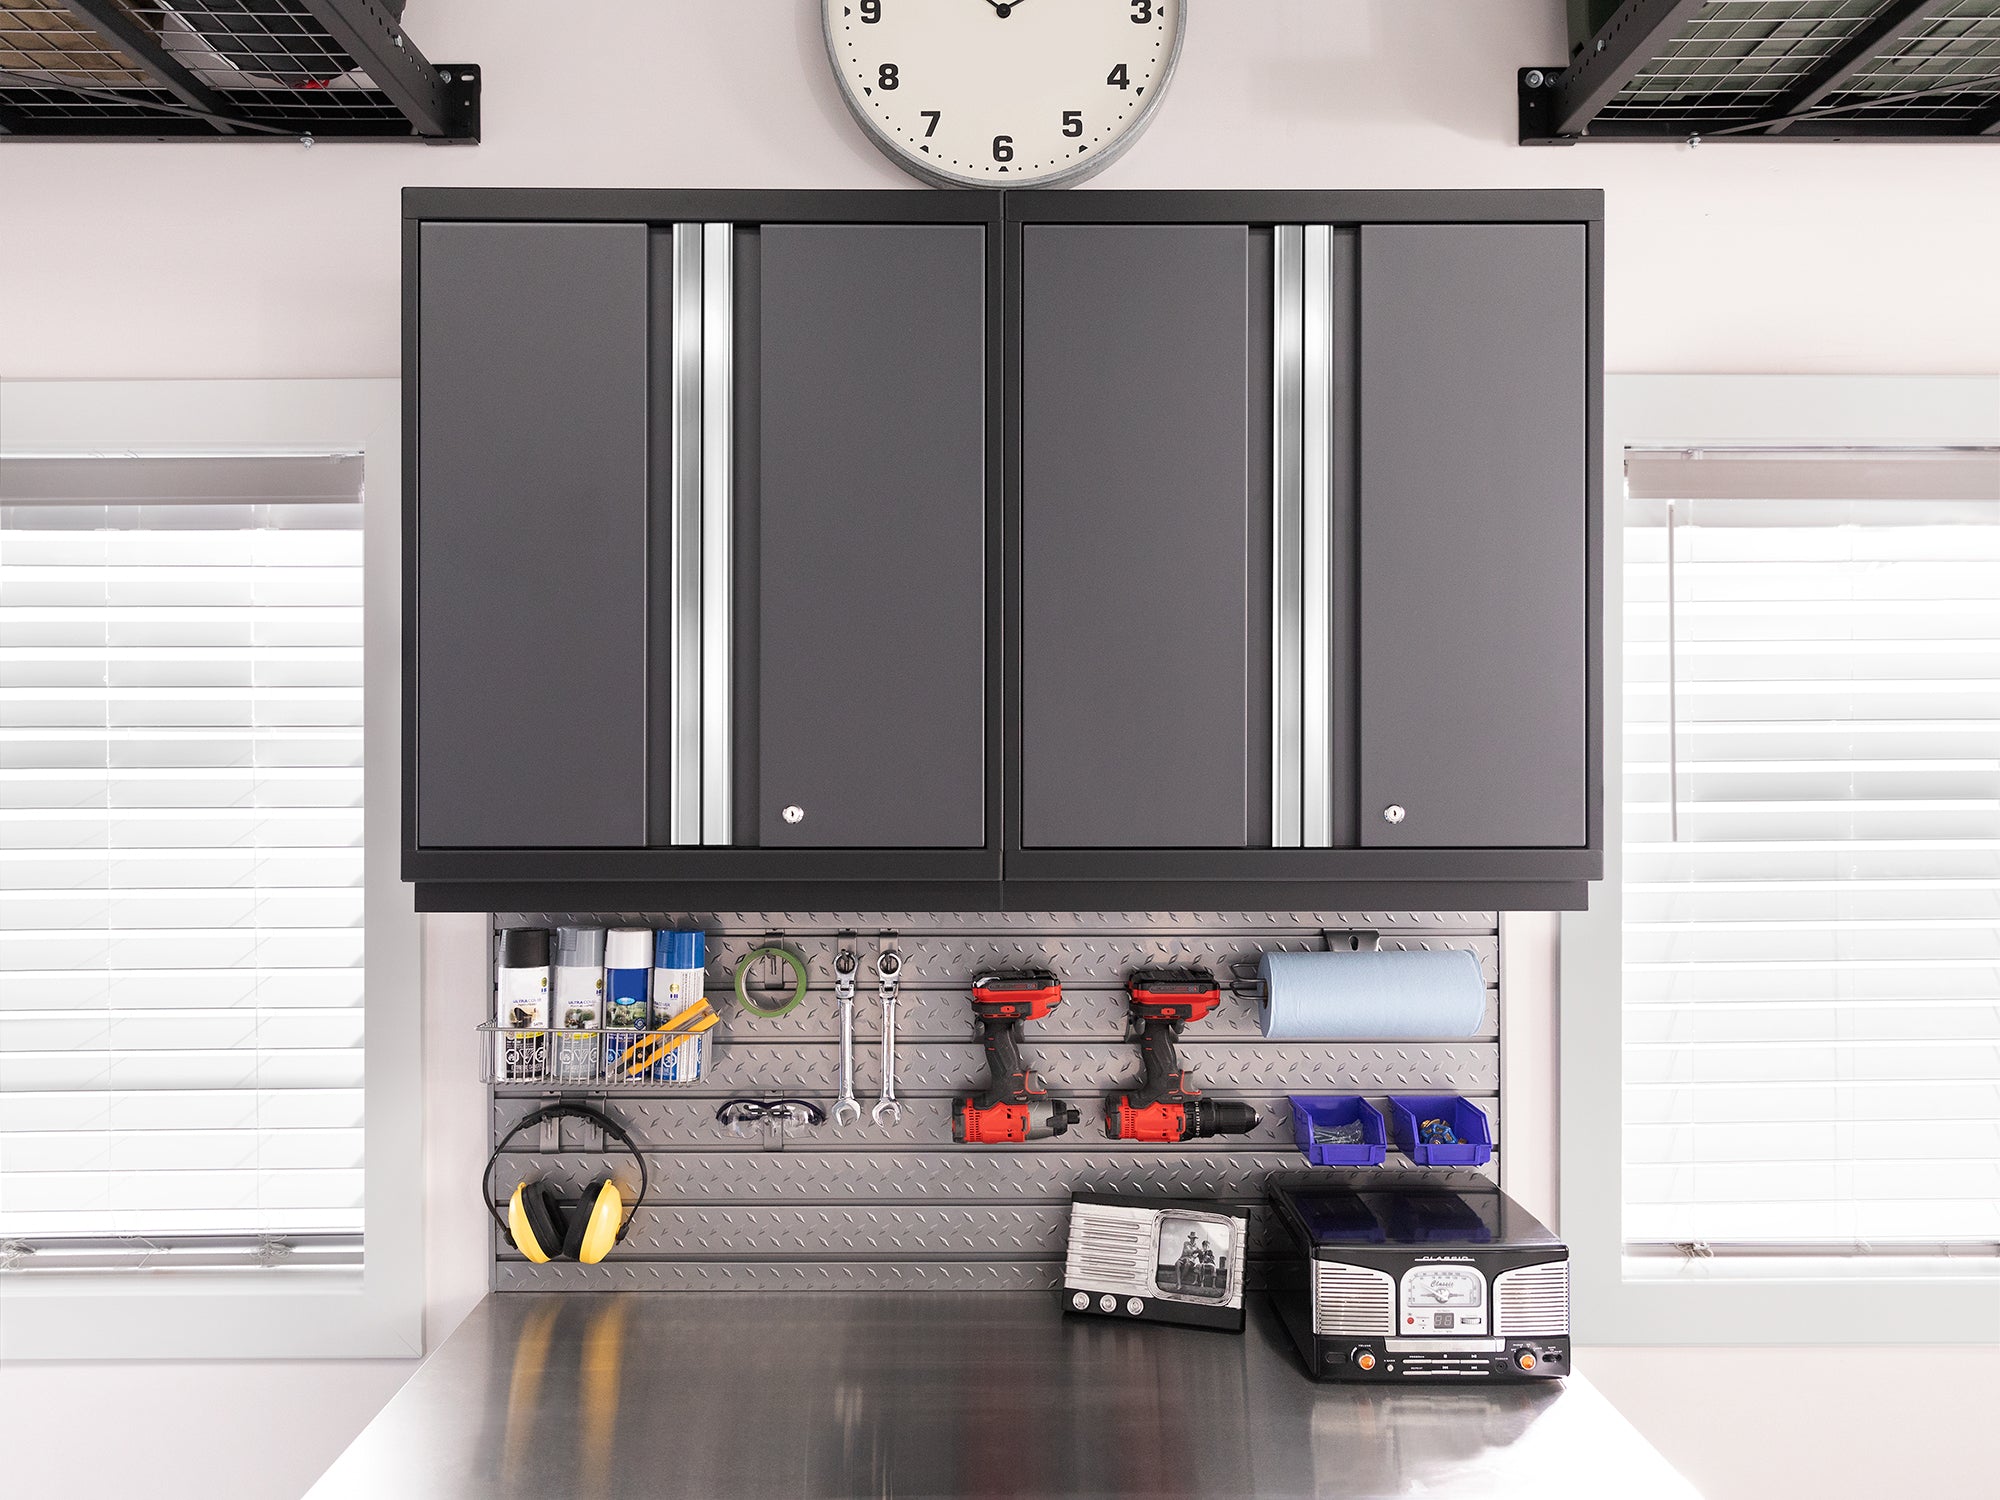 NewAge Pro Series 16 Piece Cabinet Set with Lockers, Wall, Tool Drawer, Base, Corner Wall Cabinet and 56 in. Worktop